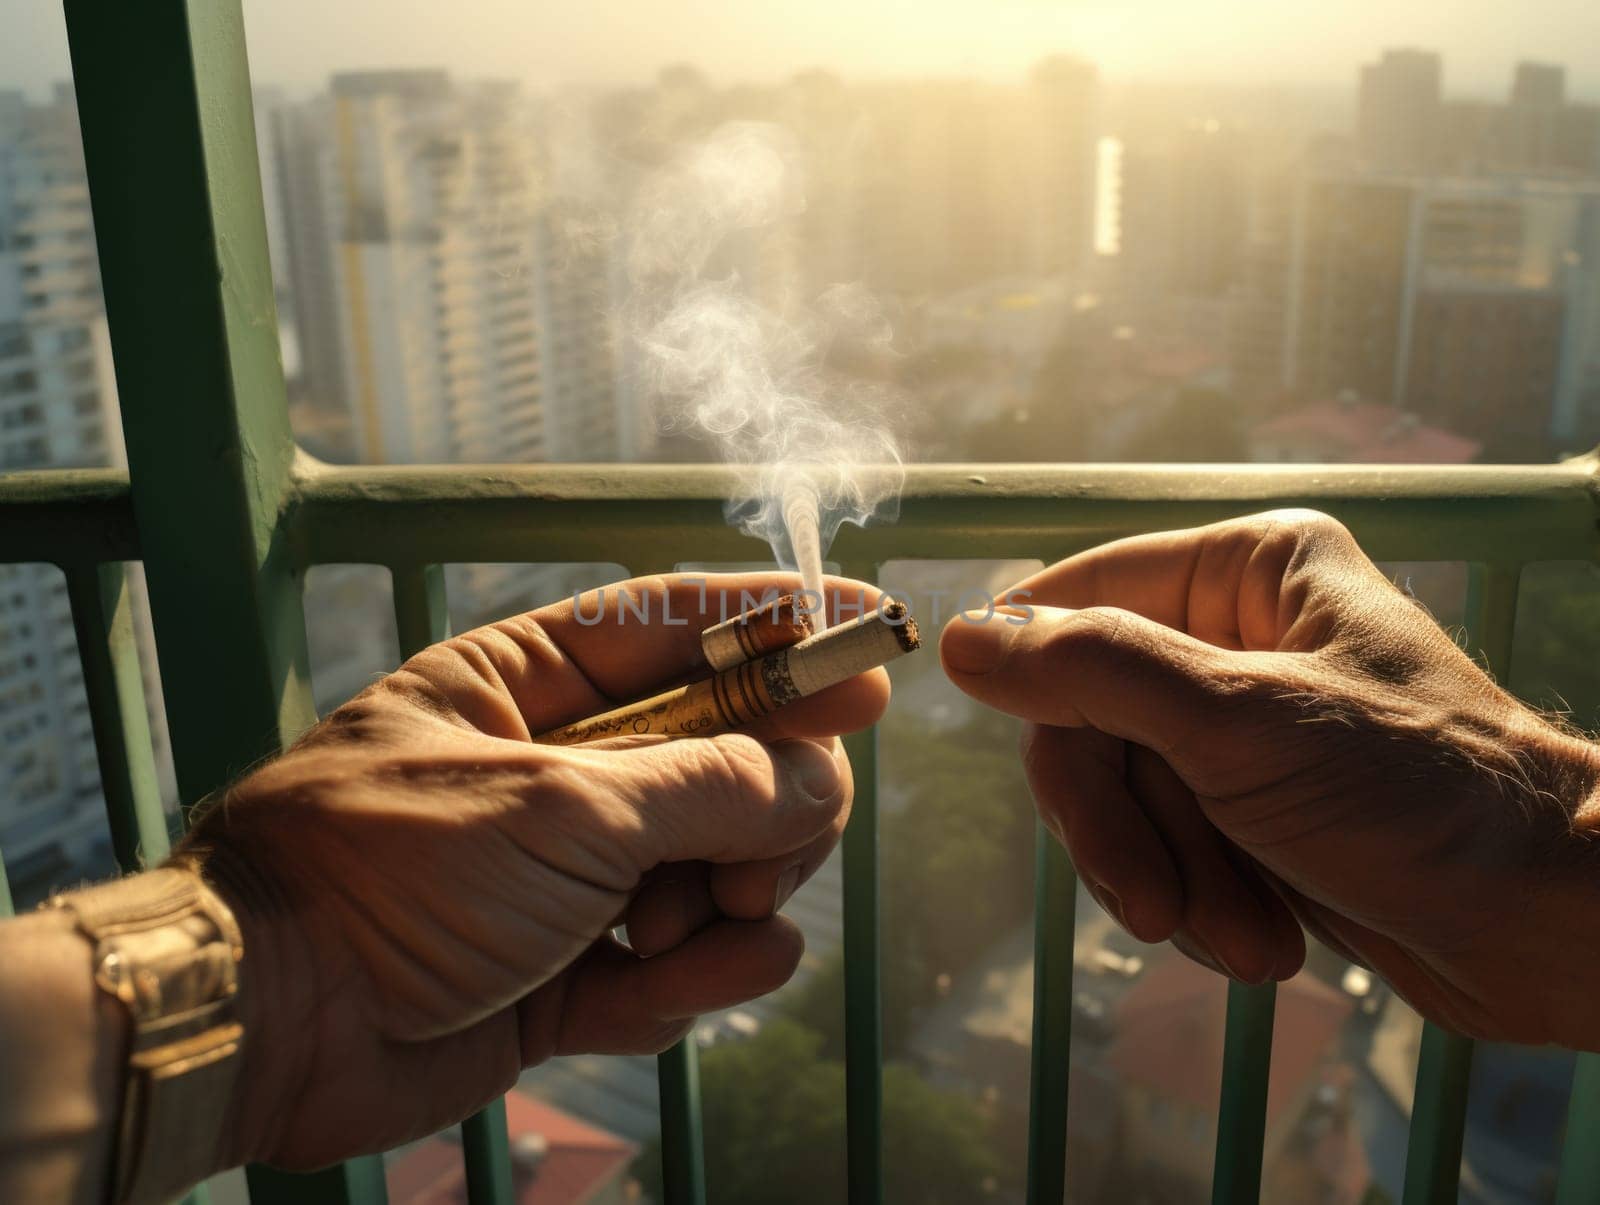 Two men engage in smoking on a balcony, holding a cigarette in their hands.